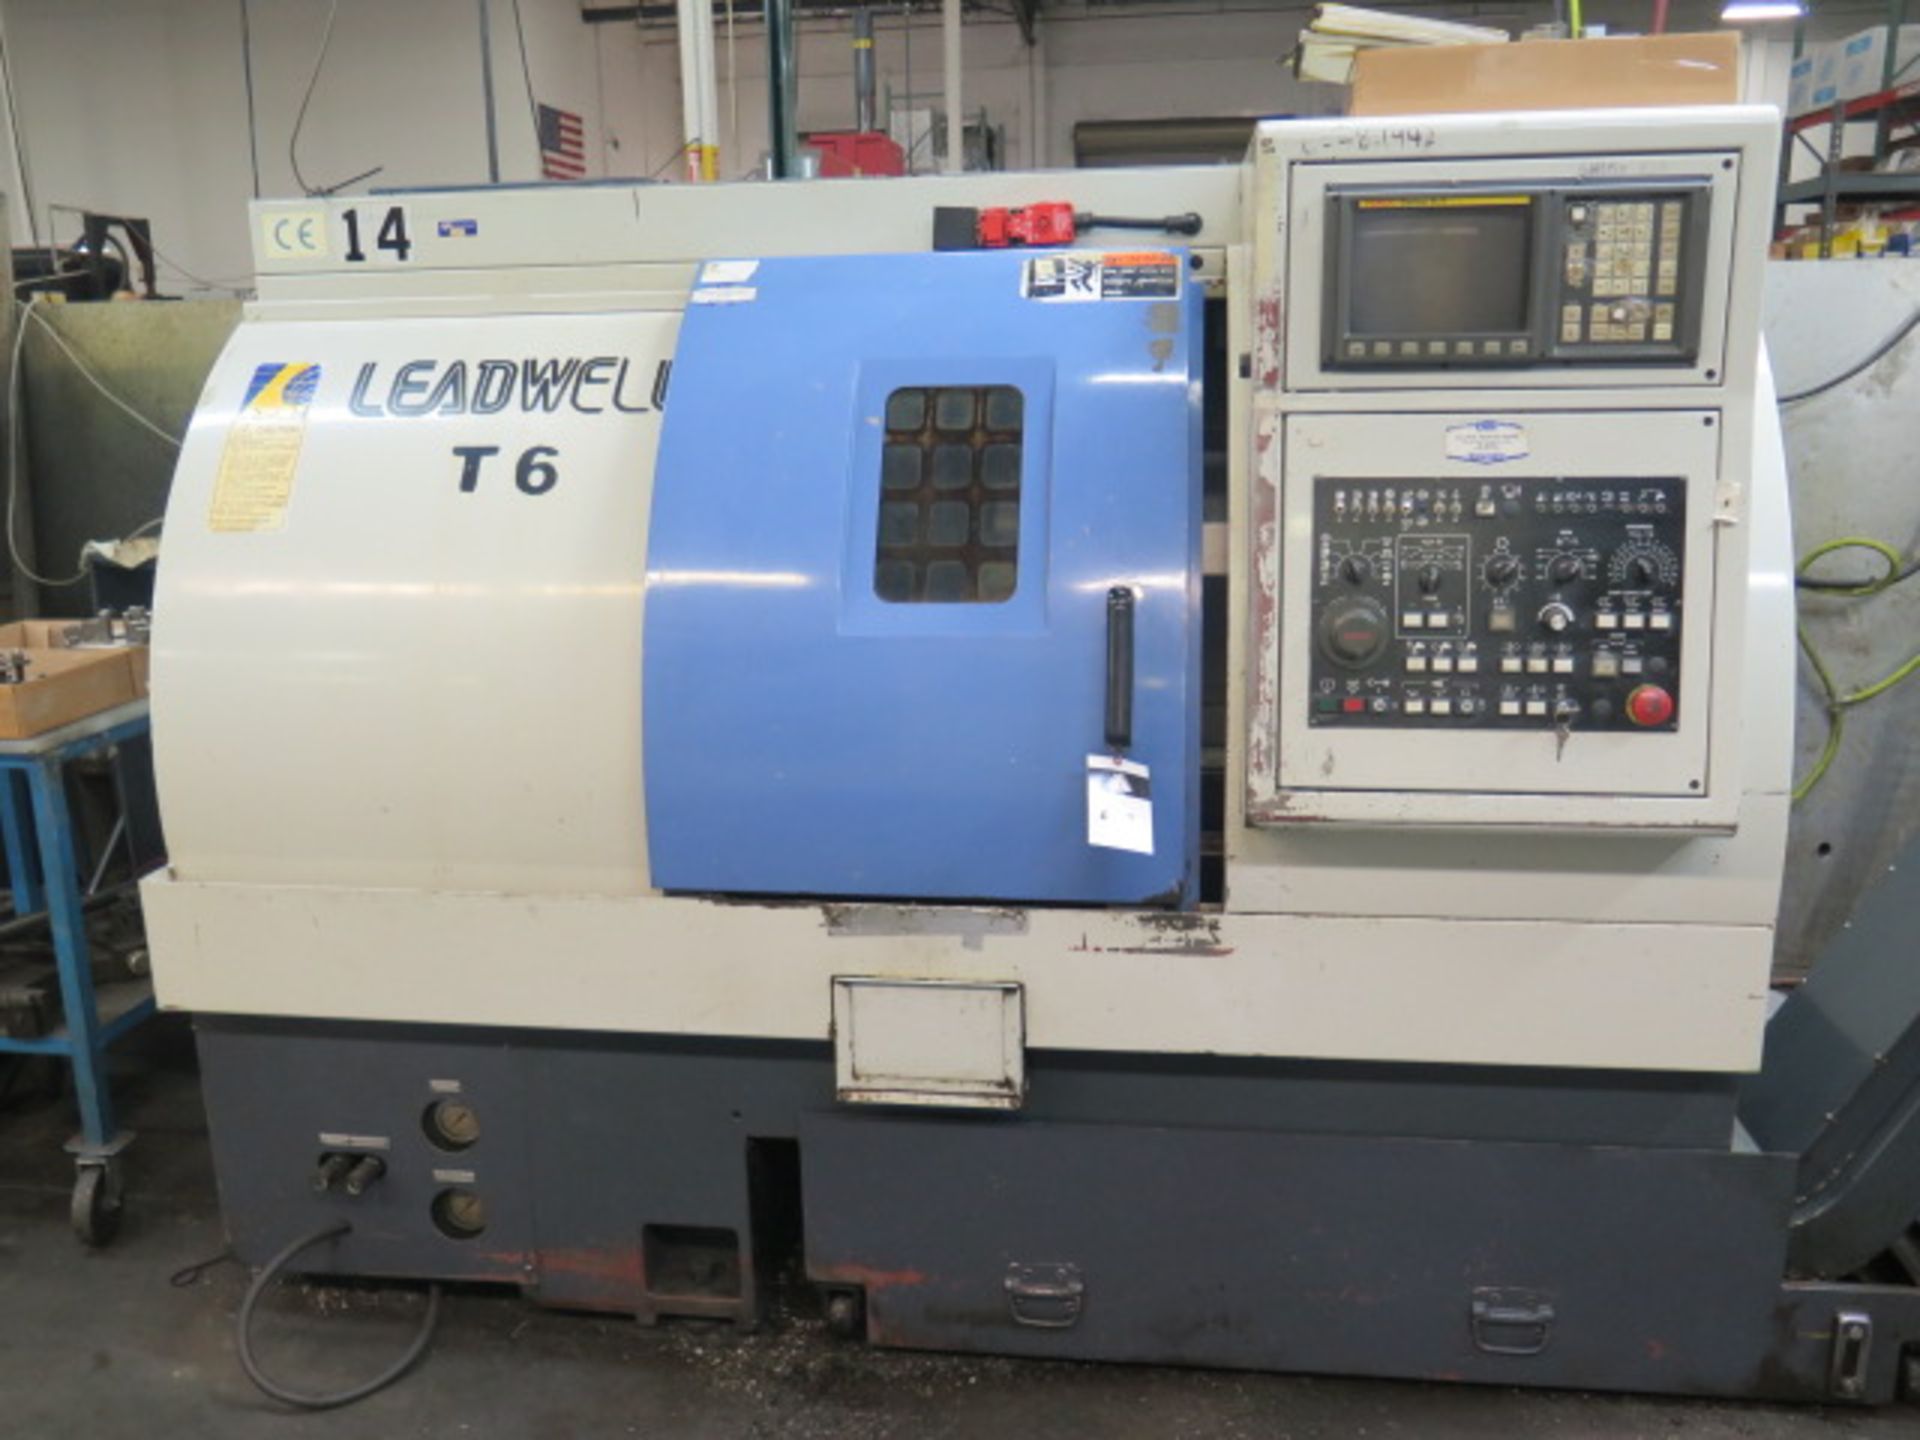 Leadwell T6 CNC Turning Center s/n L2TJJ0823 w/Fanuc Series 0-T Controls, Tool Presetter, SOLD AS IS